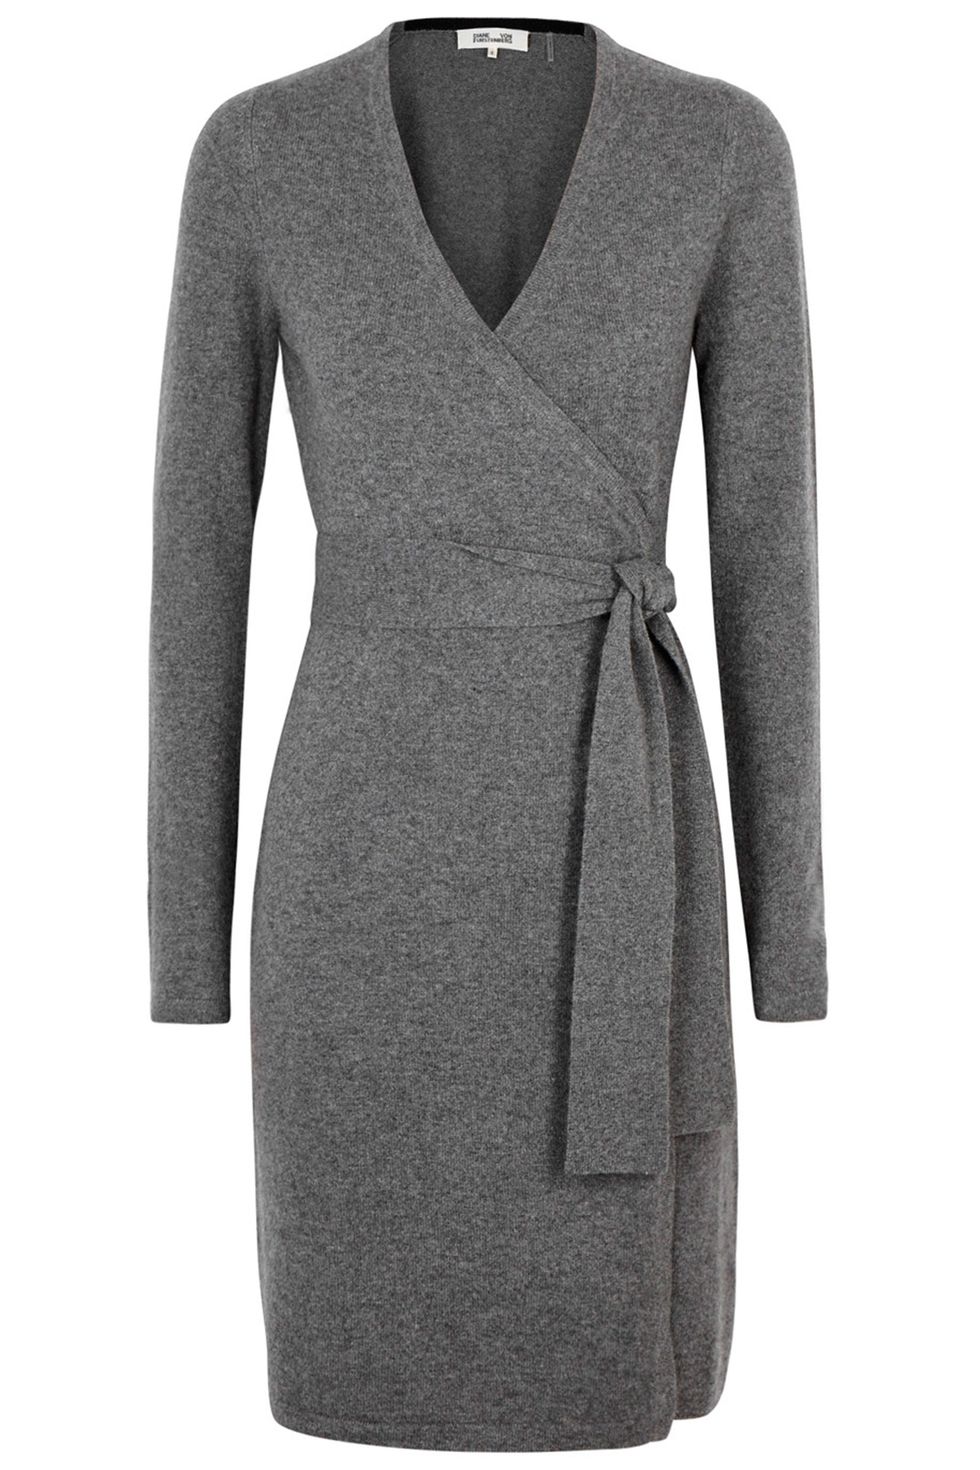 Clothing, Dress, Outerwear, Sleeve, Grey, Neck, Jersey, Day dress, Cocktail dress, Sweater, 